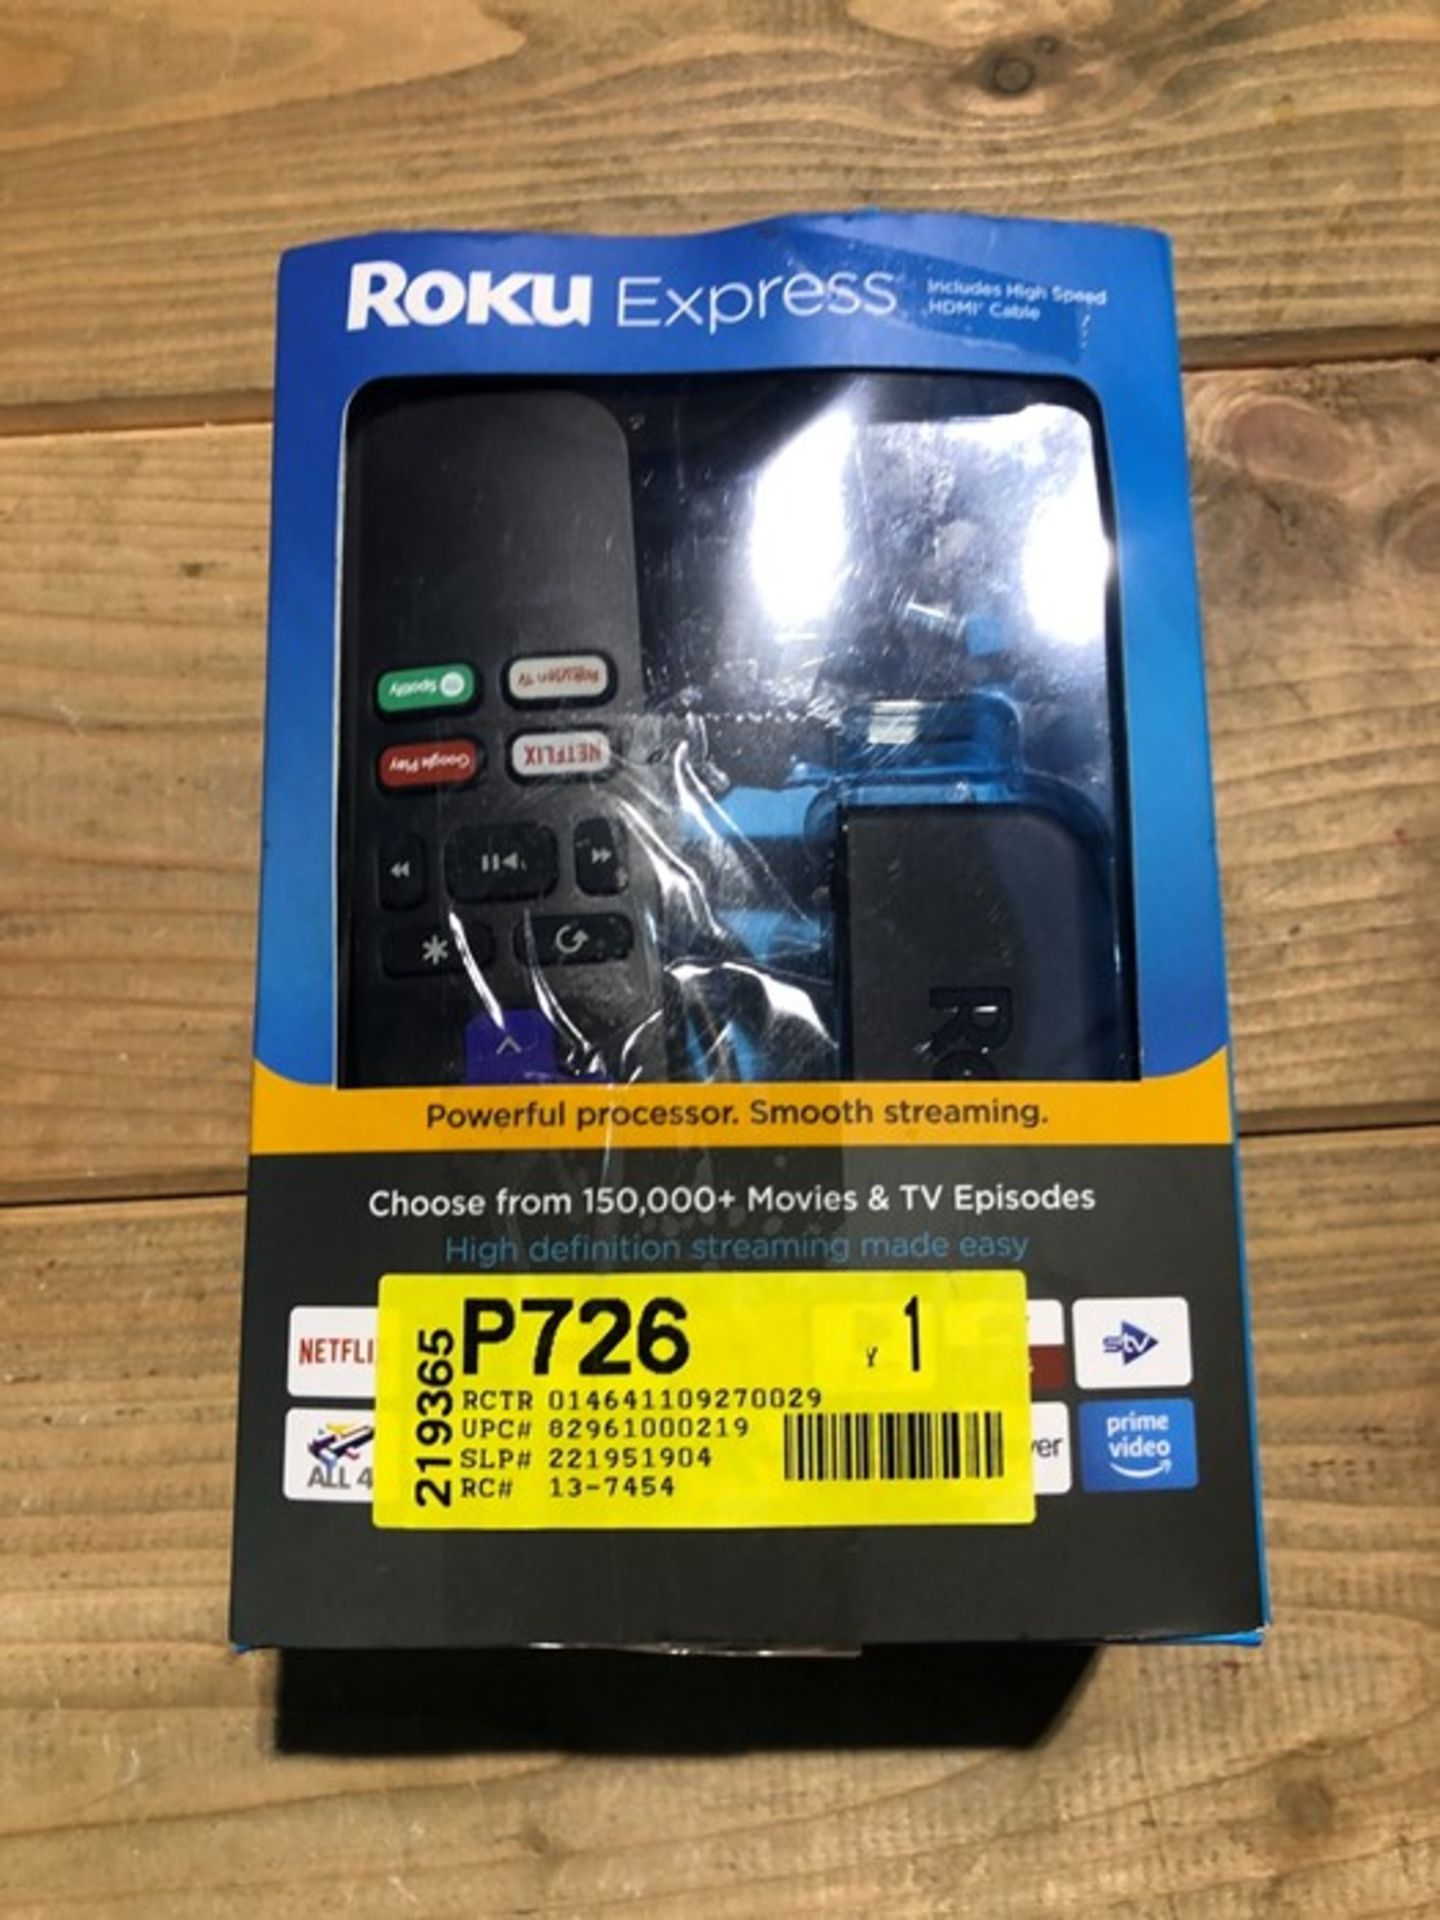 1 BOXED ROKU EXPRESS STREAMING PLAYER / RRP £22.76 / BL-9365 (PUBLIC VIEWING AVAILABLE)